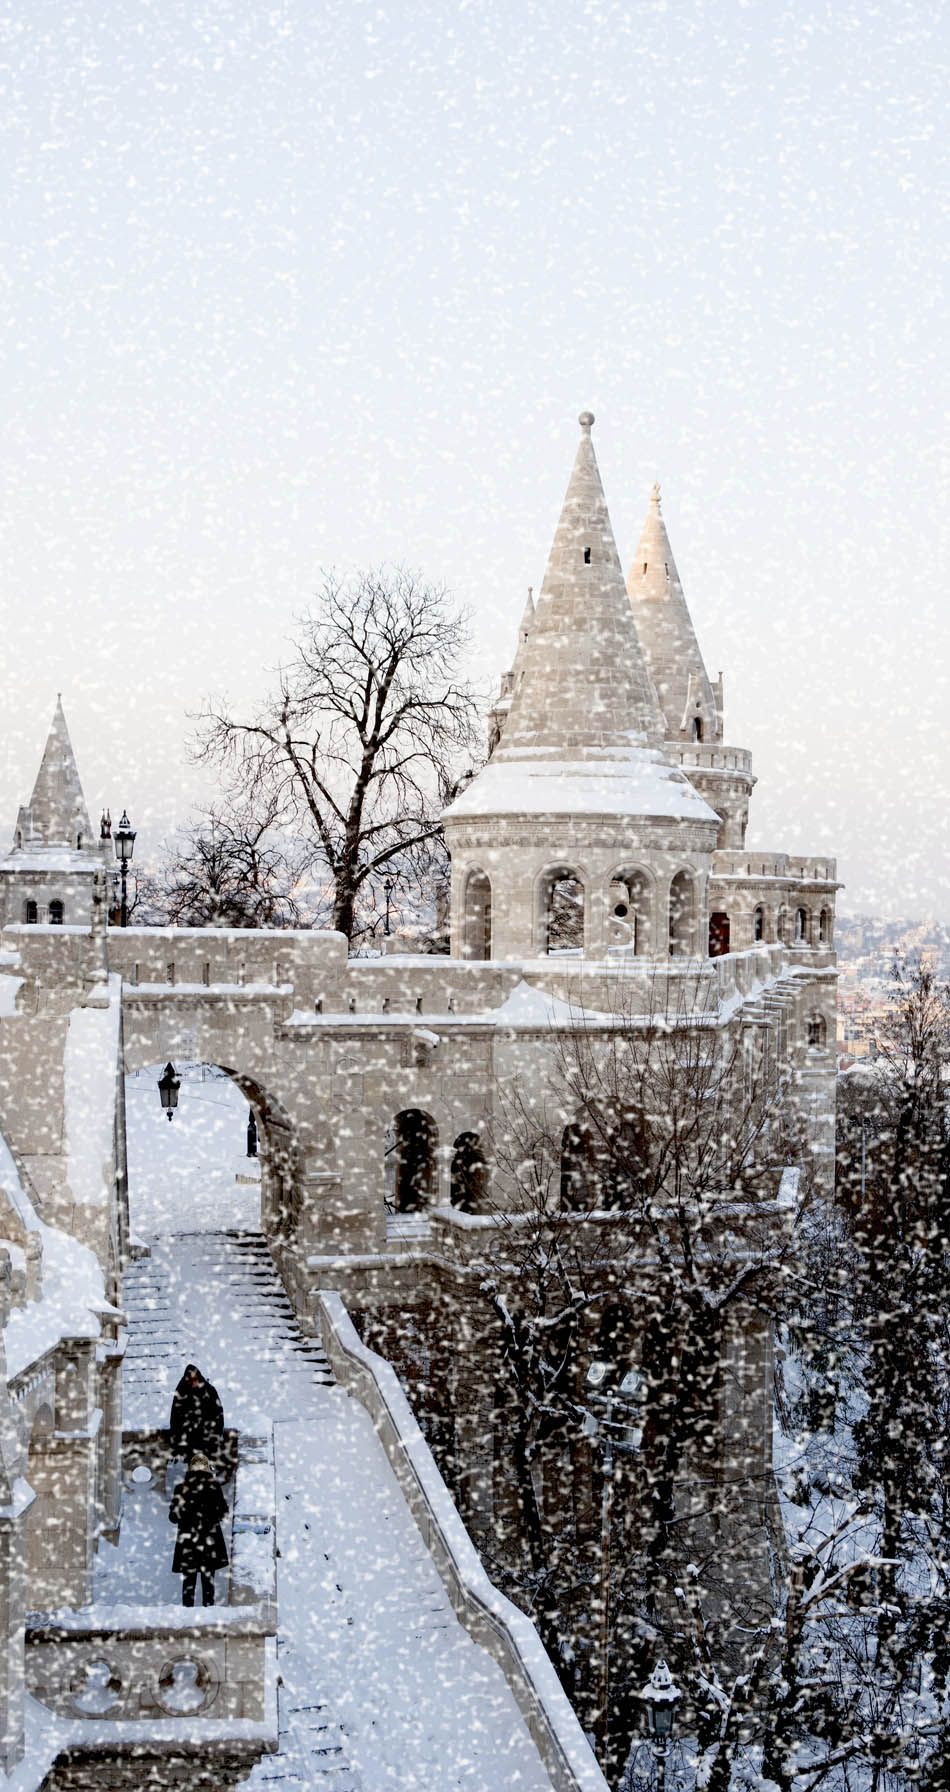 The Royal Palace at winter, Budapest